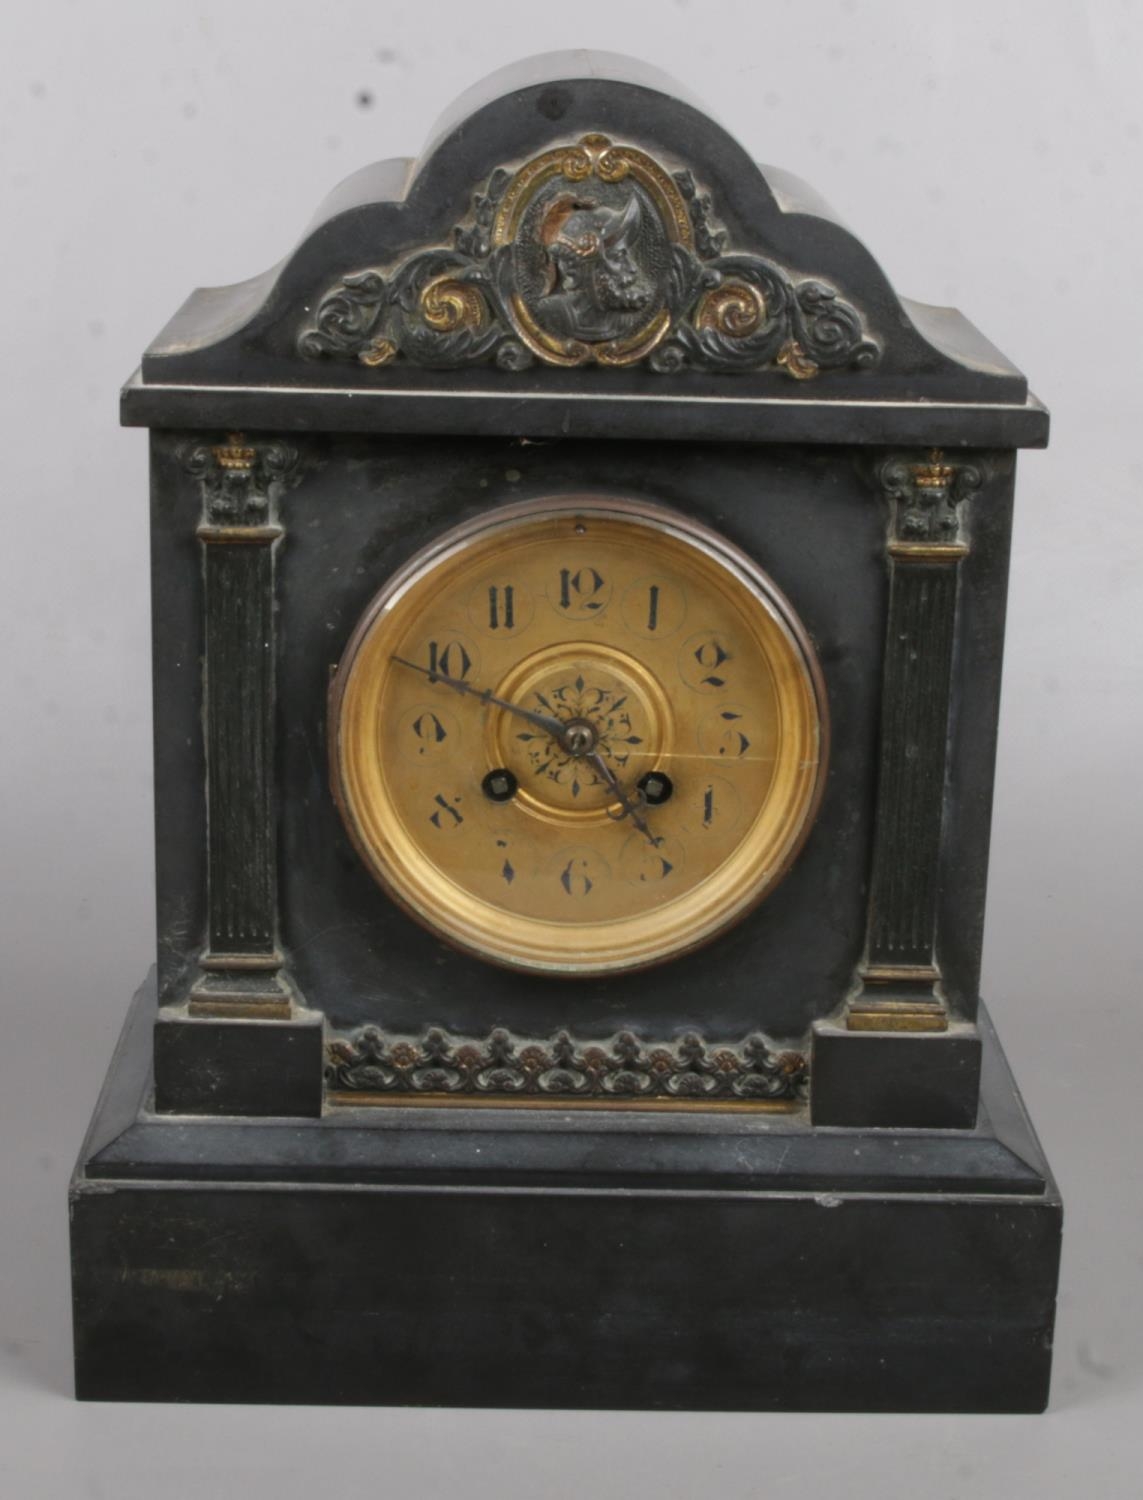 A Black Slate Marble Clock with Gold Cartouche Decoration to the Top. Crack in the Glass on the